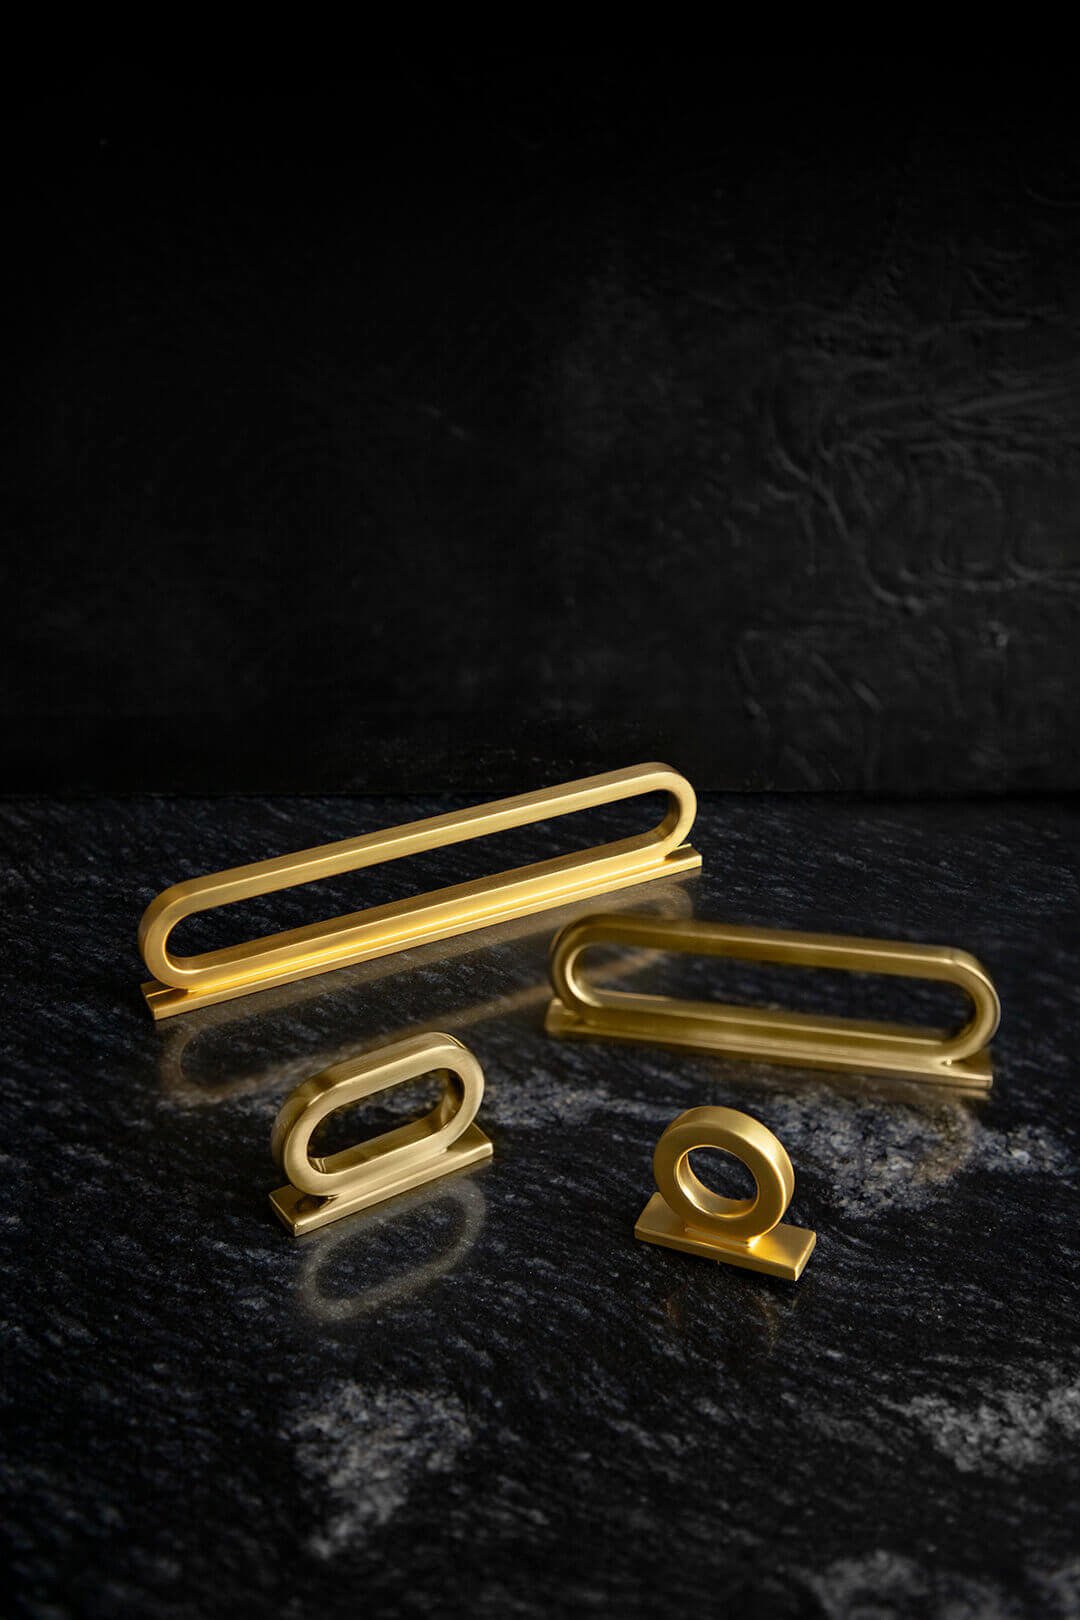 Gold cabinet handles sit against a black marble background